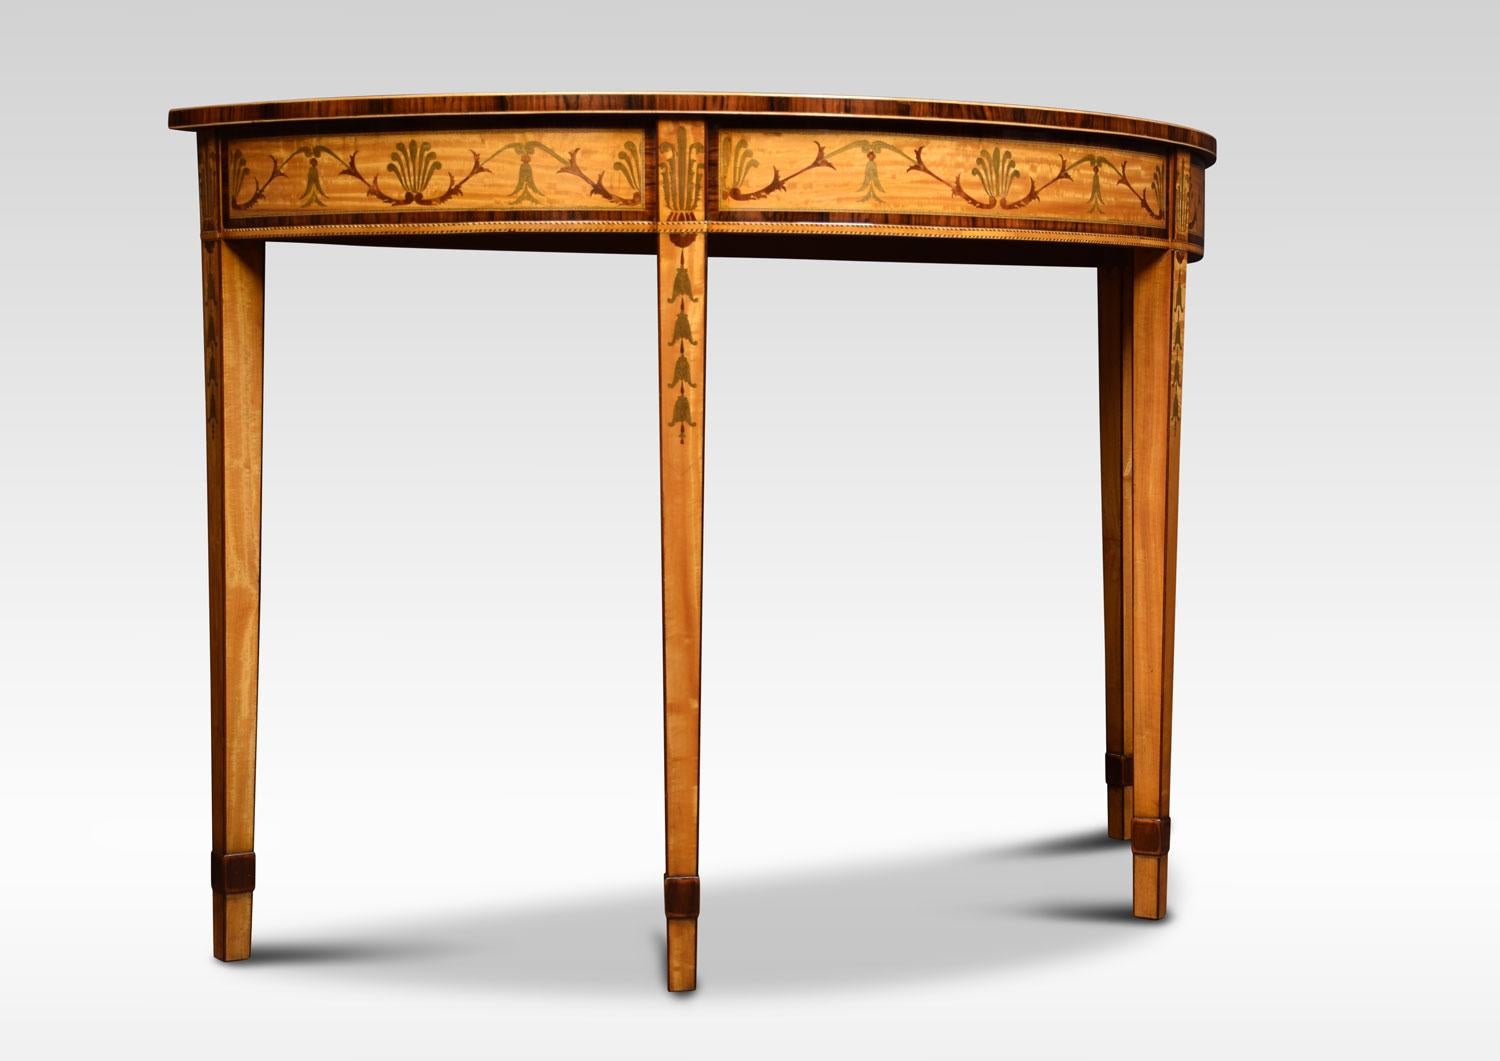 20th Century Pair of Satinwood Inlaid Neoclassical Style Demilune Console Tables